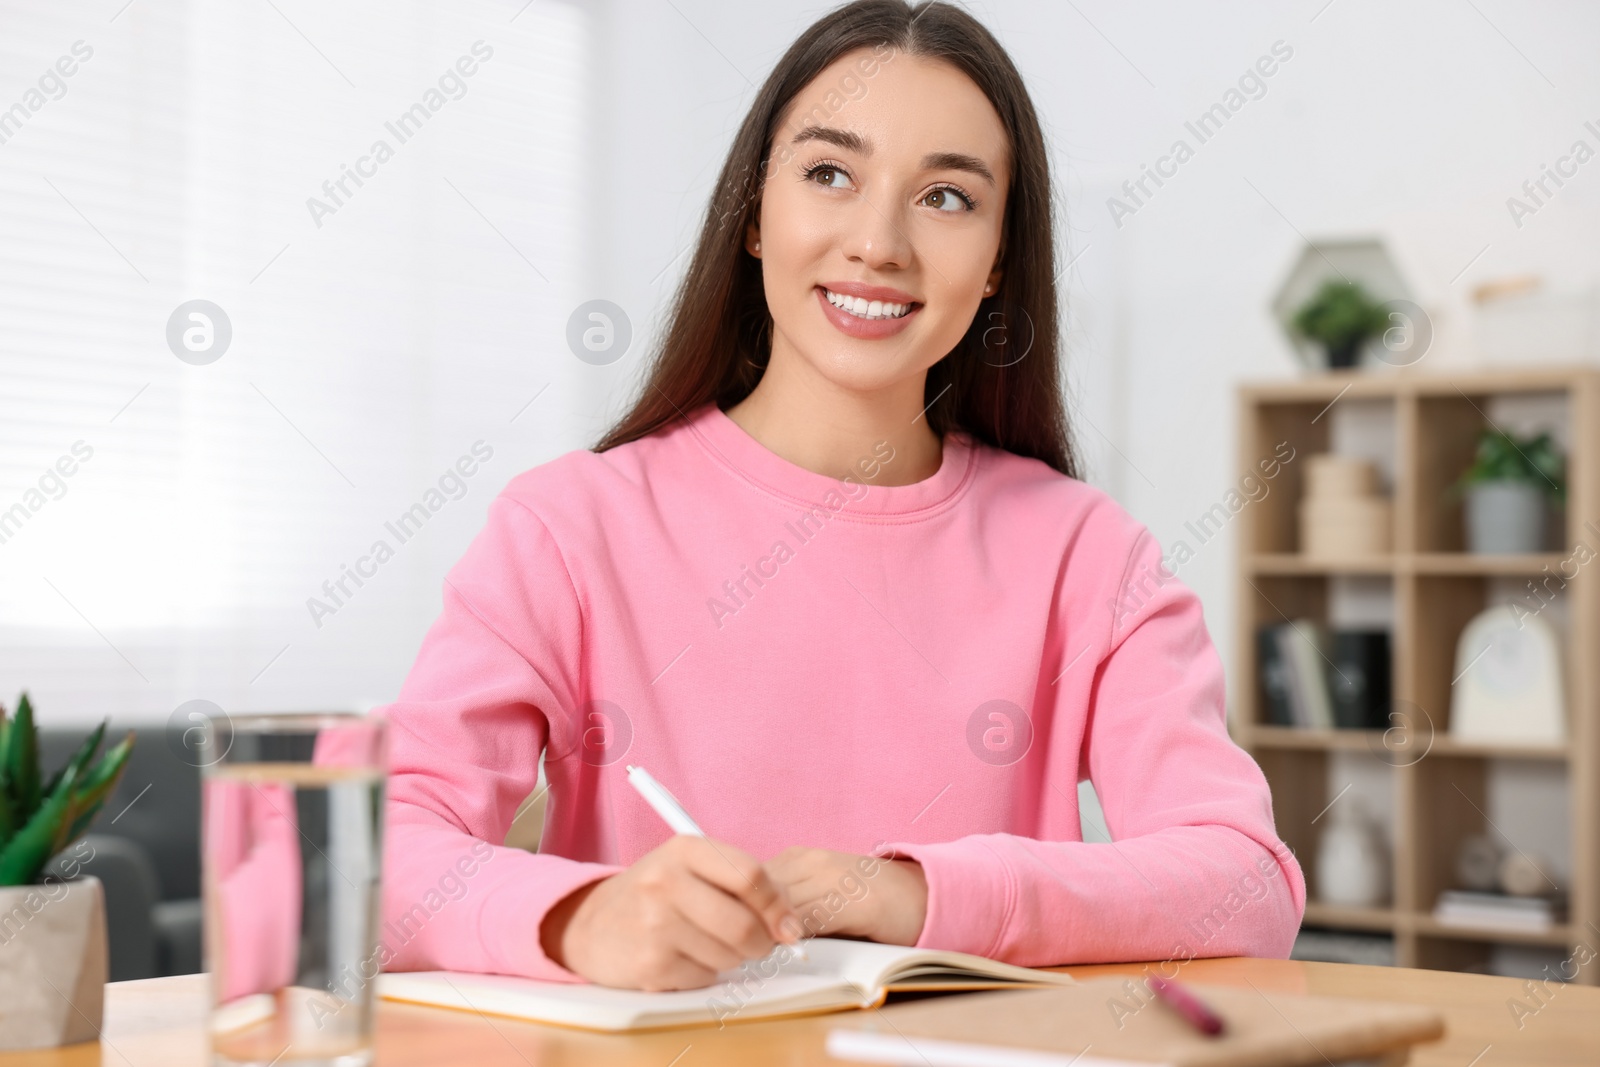 Photo of Young woman writing in notebook at wooden table indoors